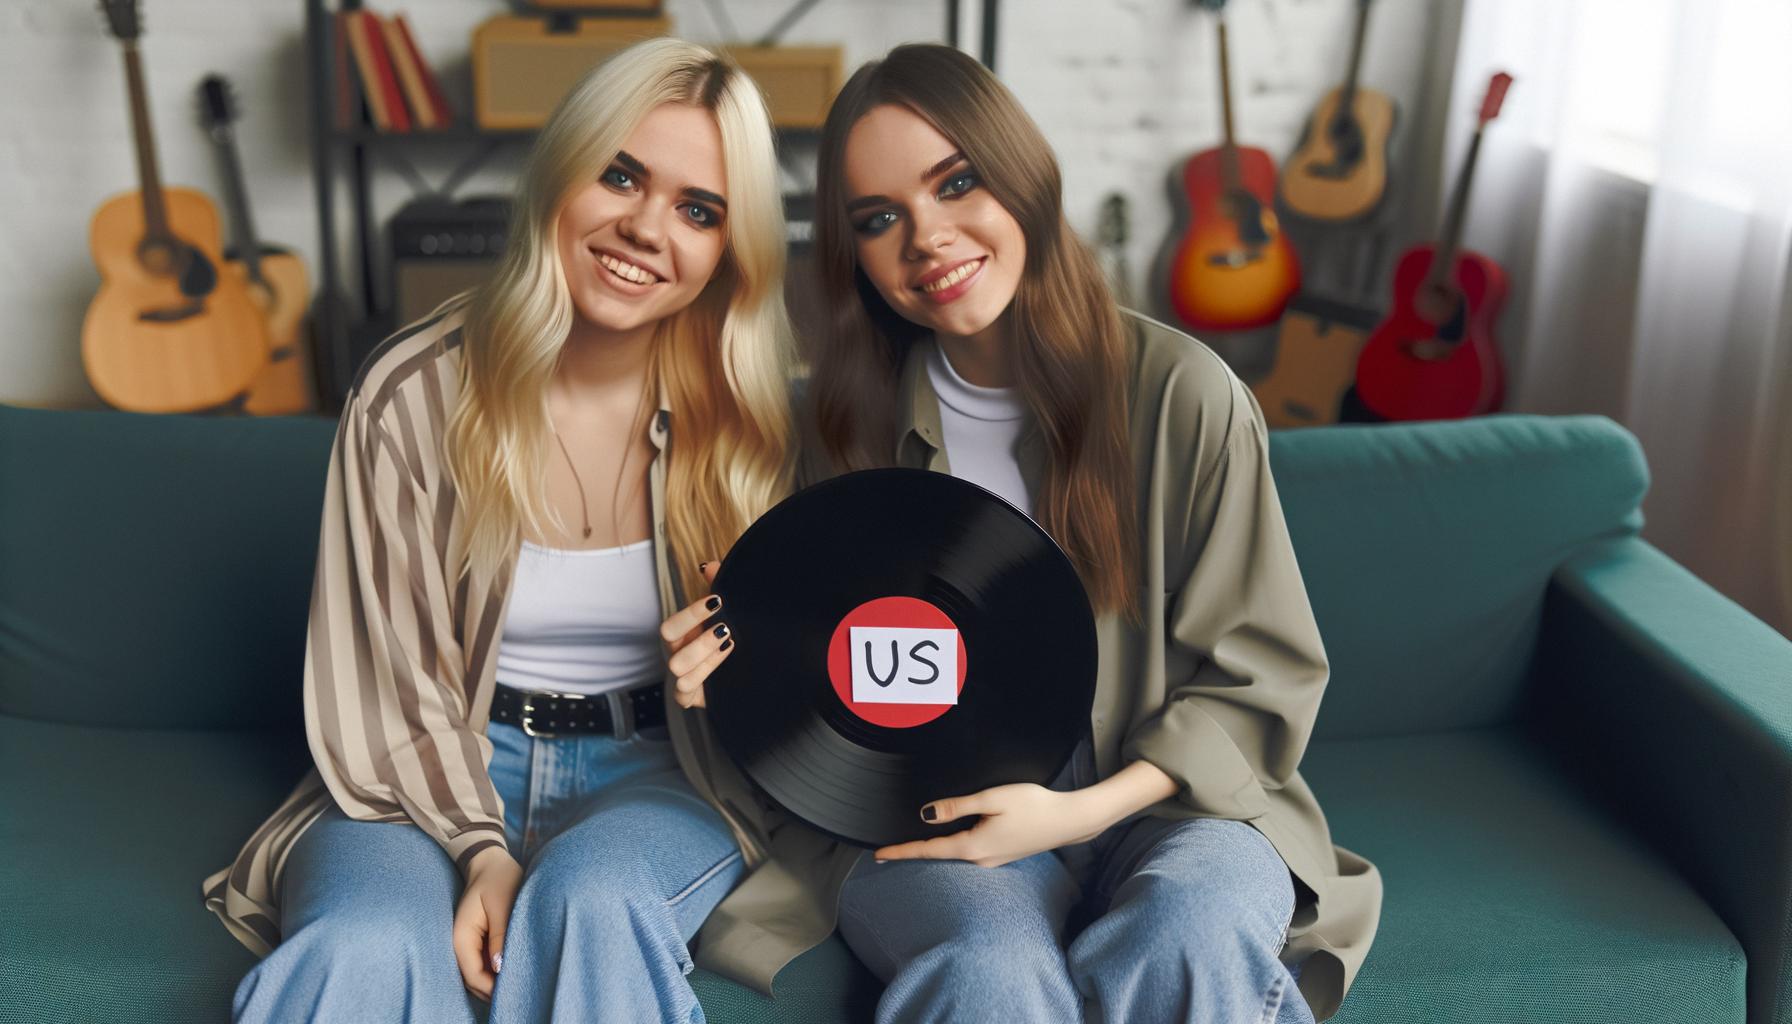 Taylor Swift and Gracie Abrams release their song 'Us'.